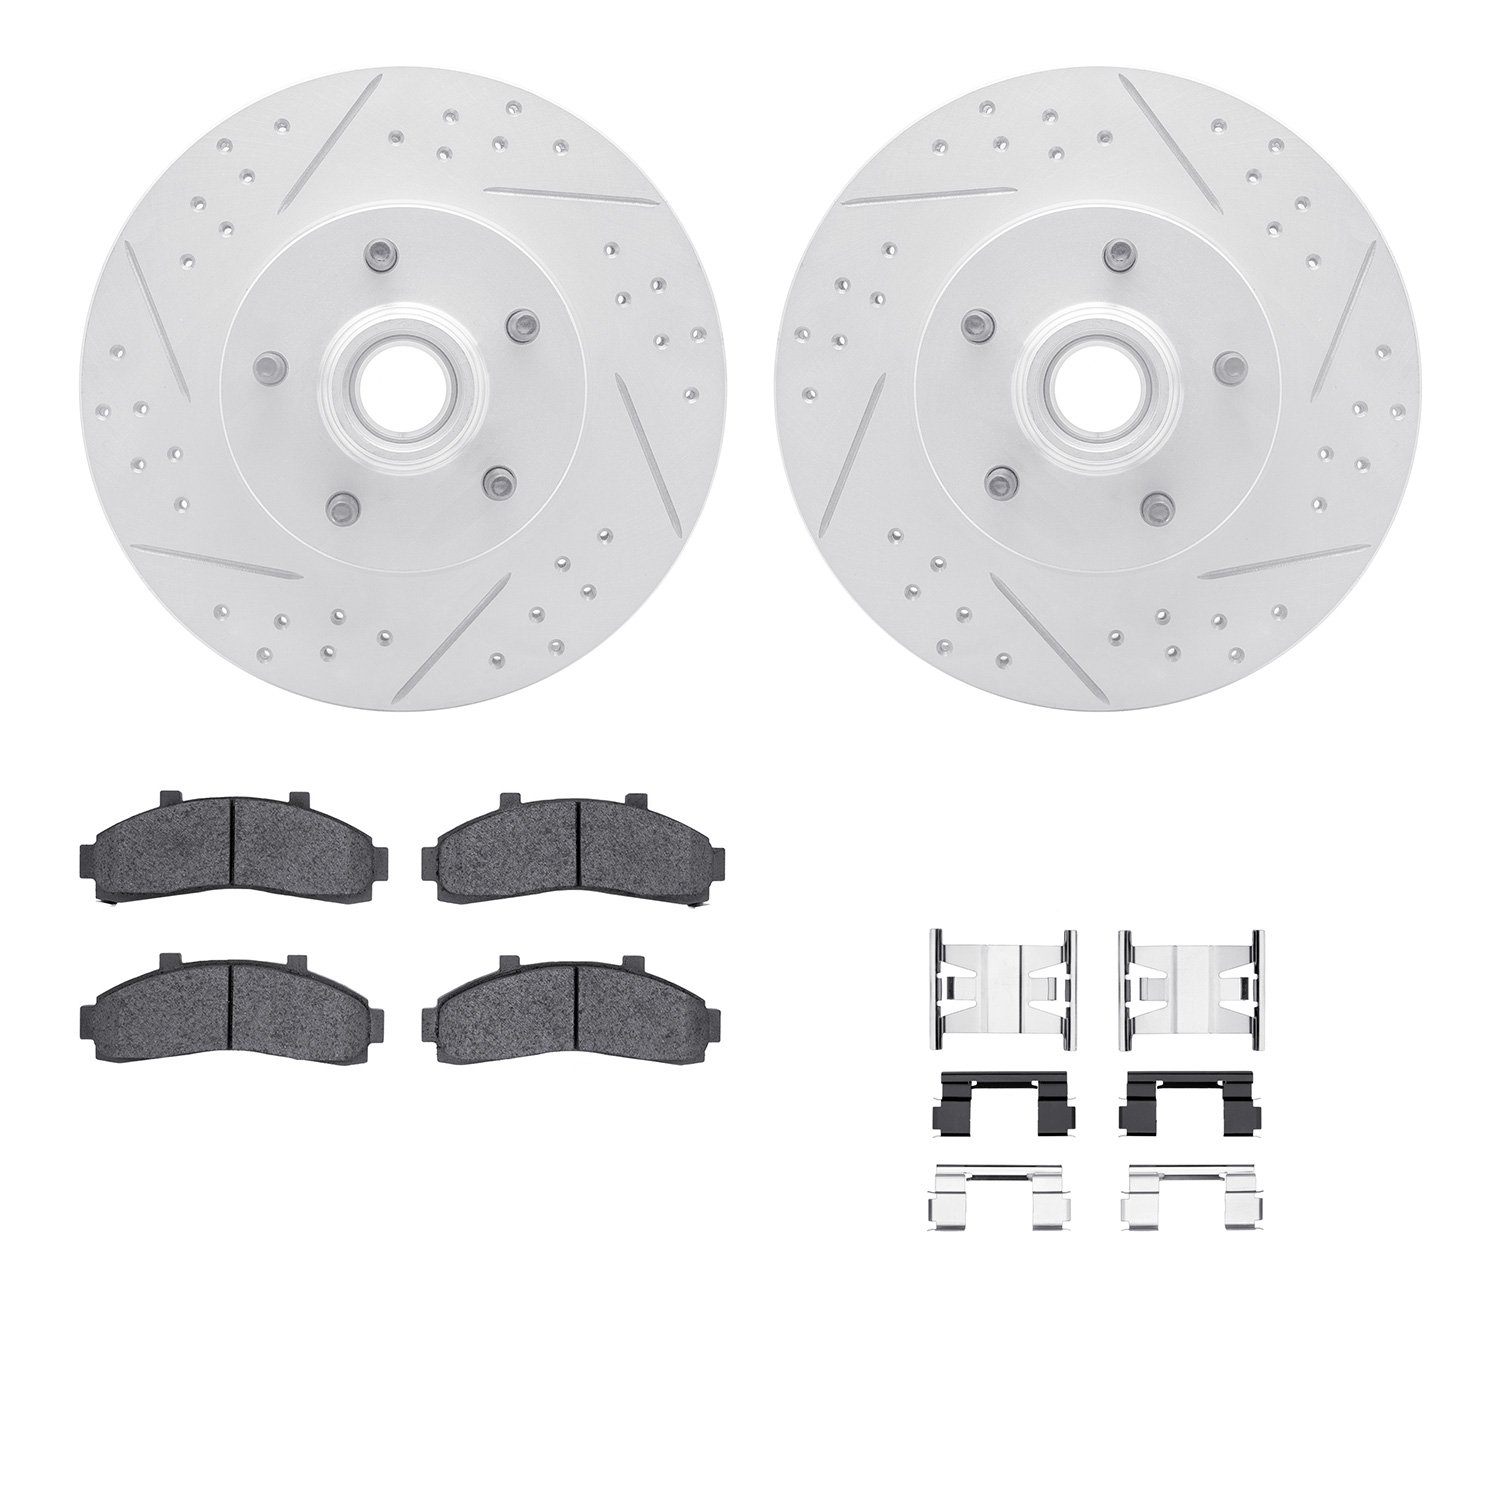 2212-99085 Geoperformance Drilled/Slotted Rotors w/Heavy-Duty Pads Kit & Hardware, 1995-2002 Ford/Lincoln/Mercury/Mazda, Positio